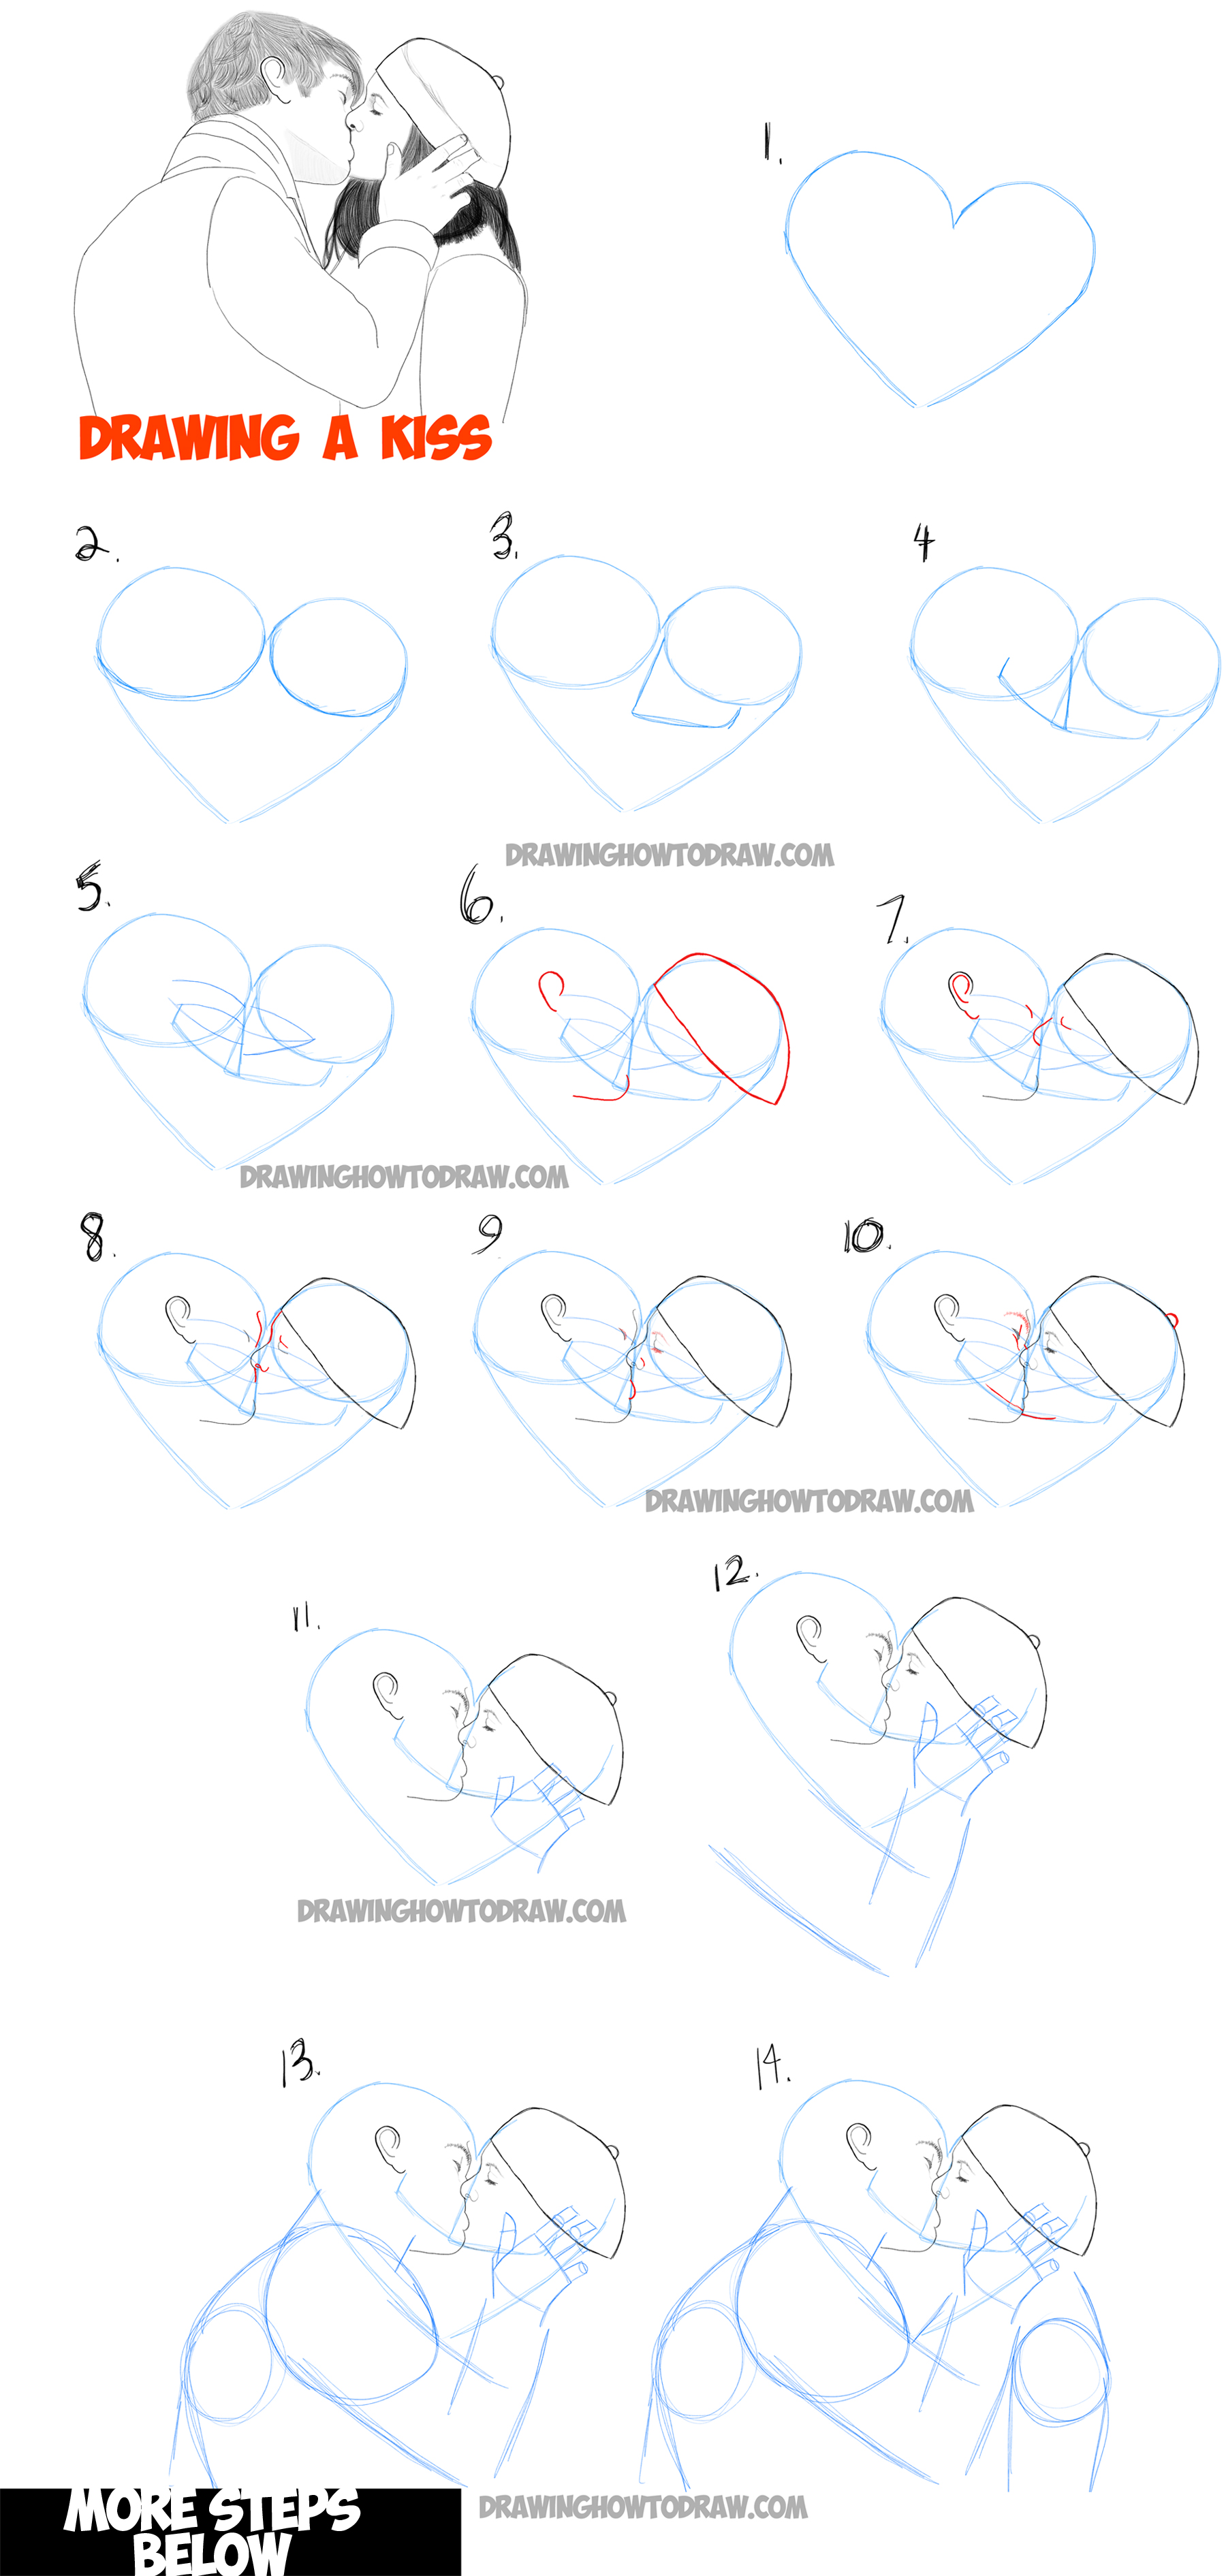 Learn How to Draw Romantic Kisses : Kissing Couples - Step by Step Drawing Tutorial